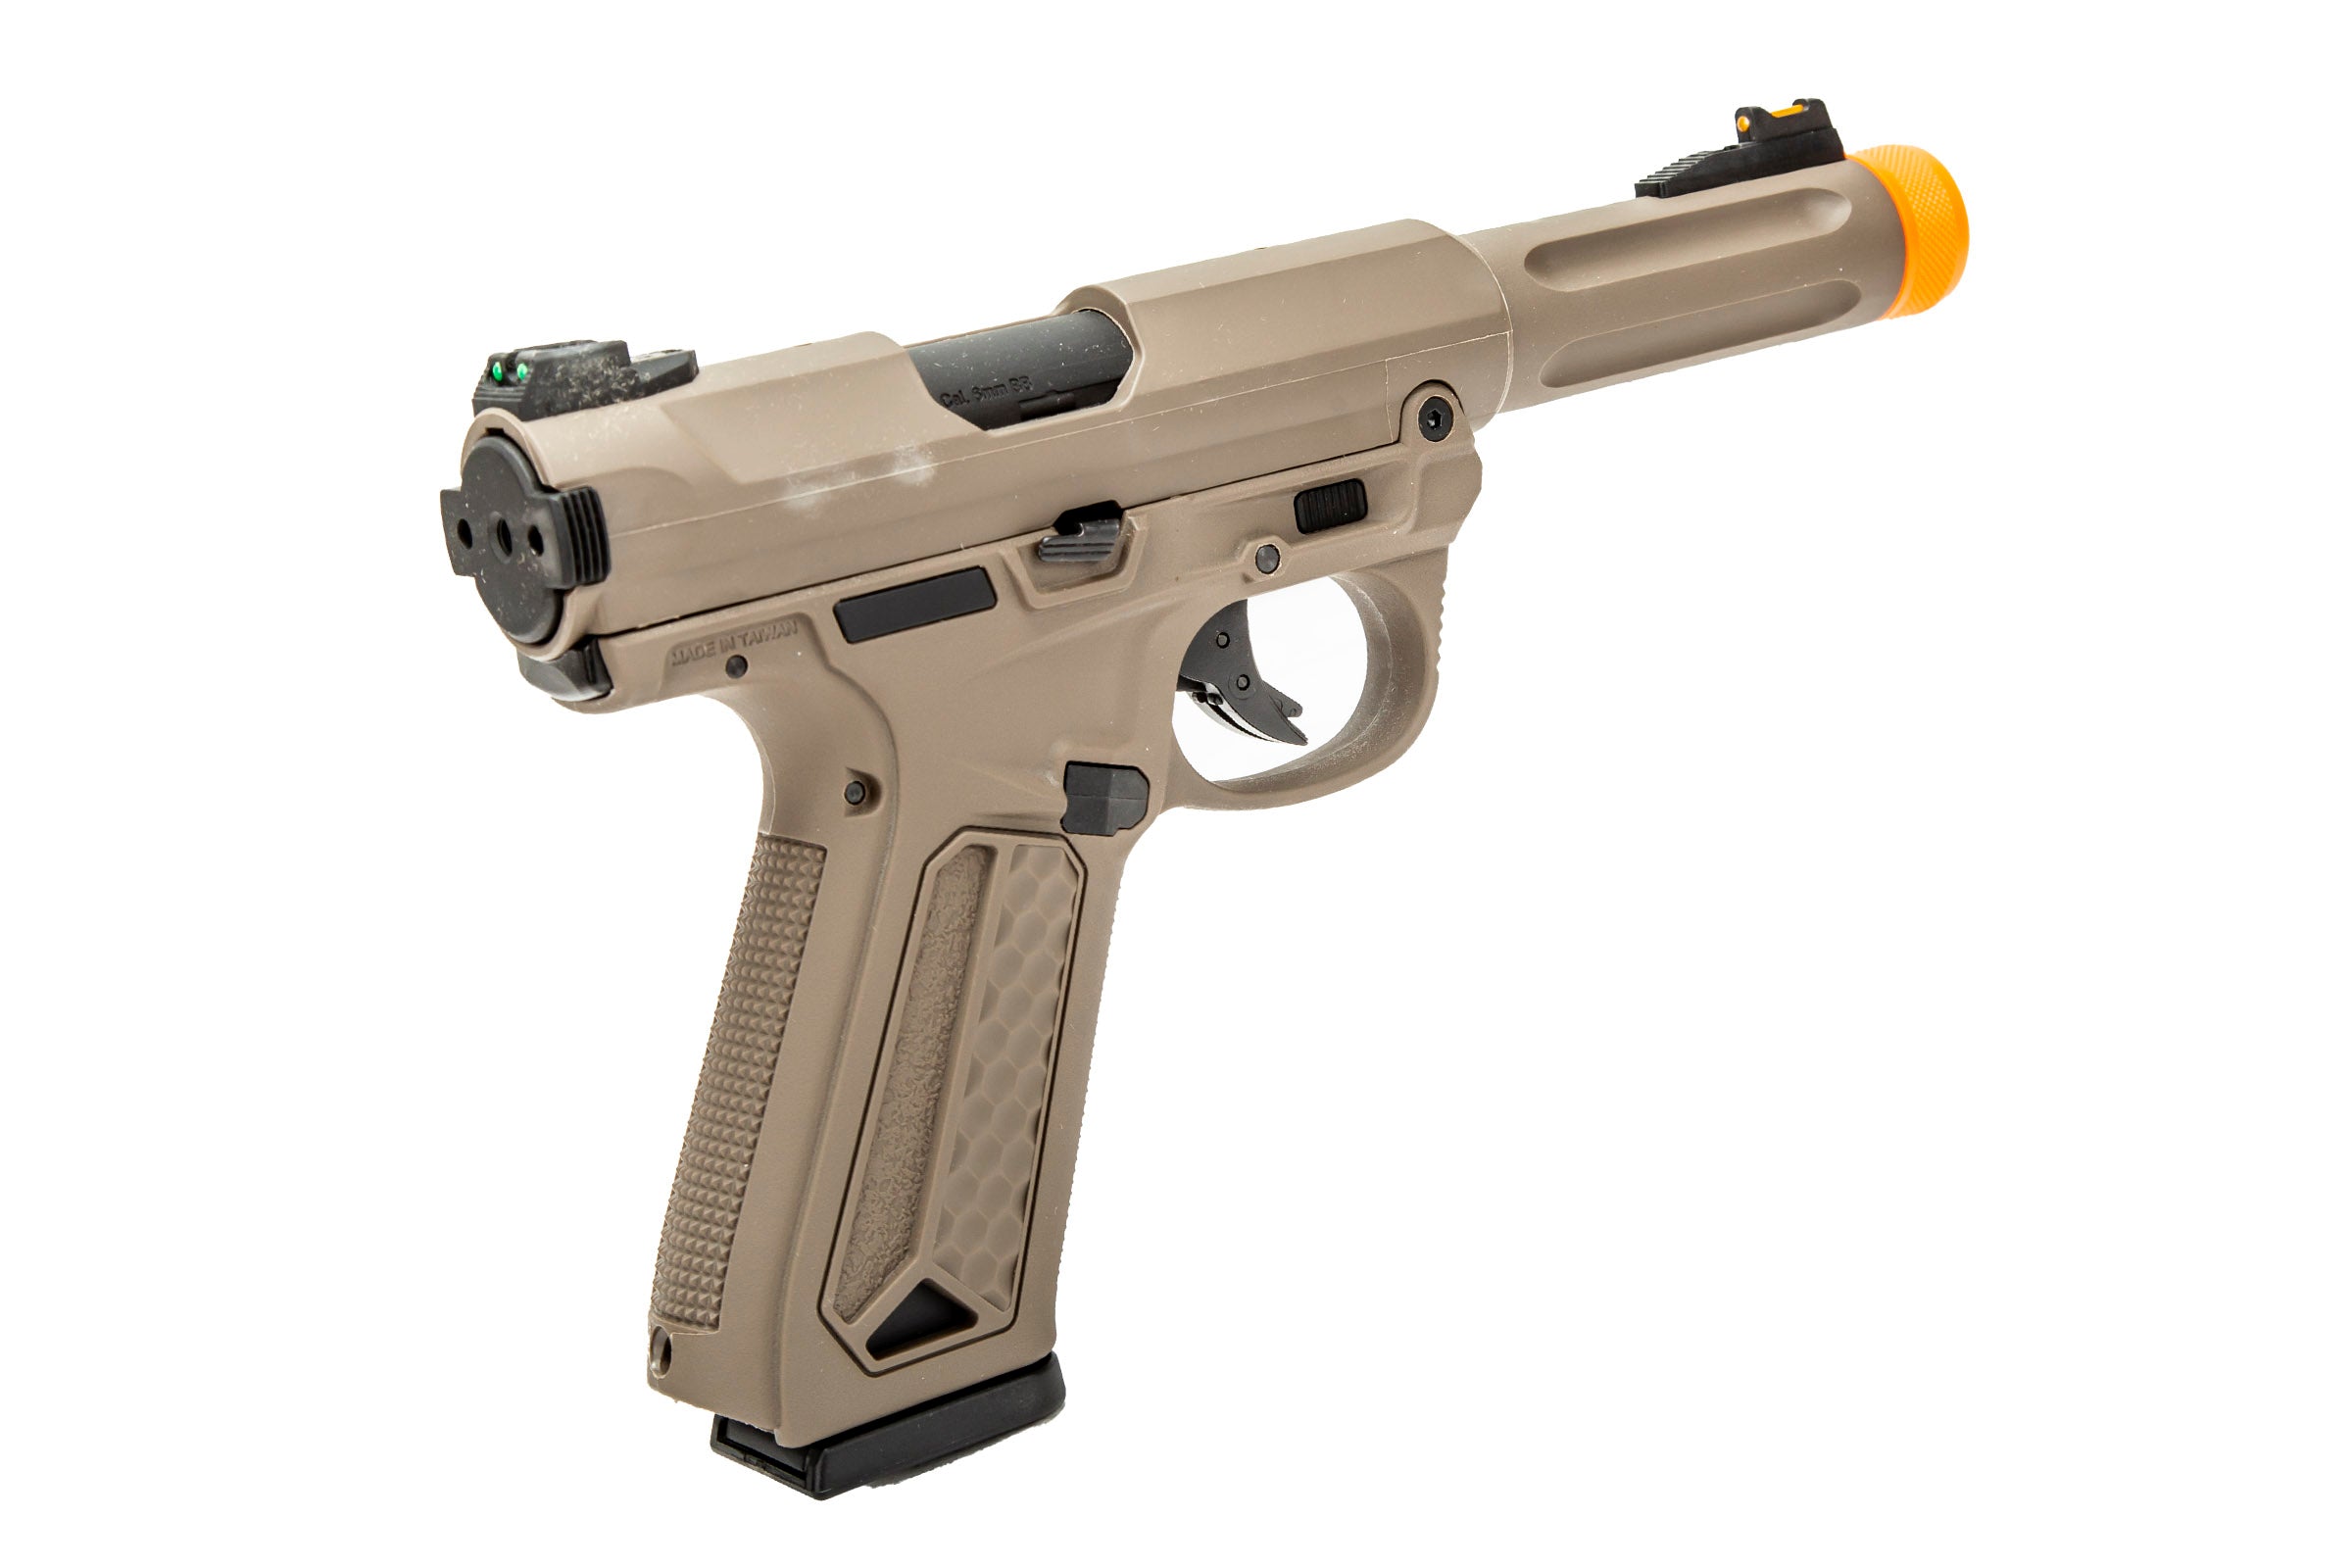 Action Army AAP-01 "Assassin" Airsoft Gas Blowback Pistol - ssairsoft.com